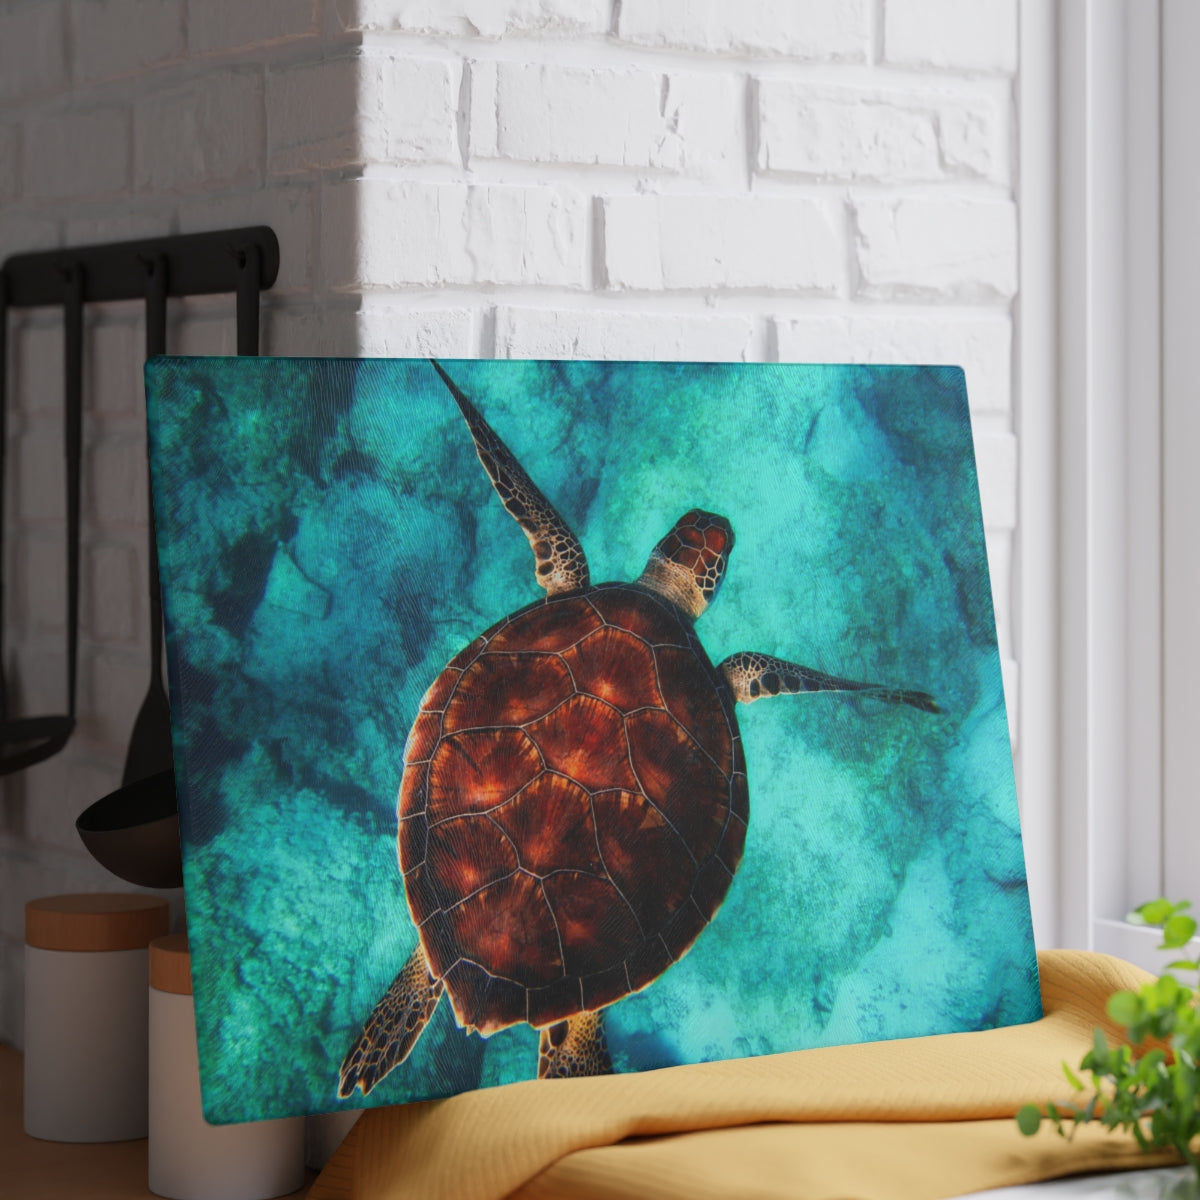 Glass Cutting Board, Sea Turtle - Two Sizes Available1